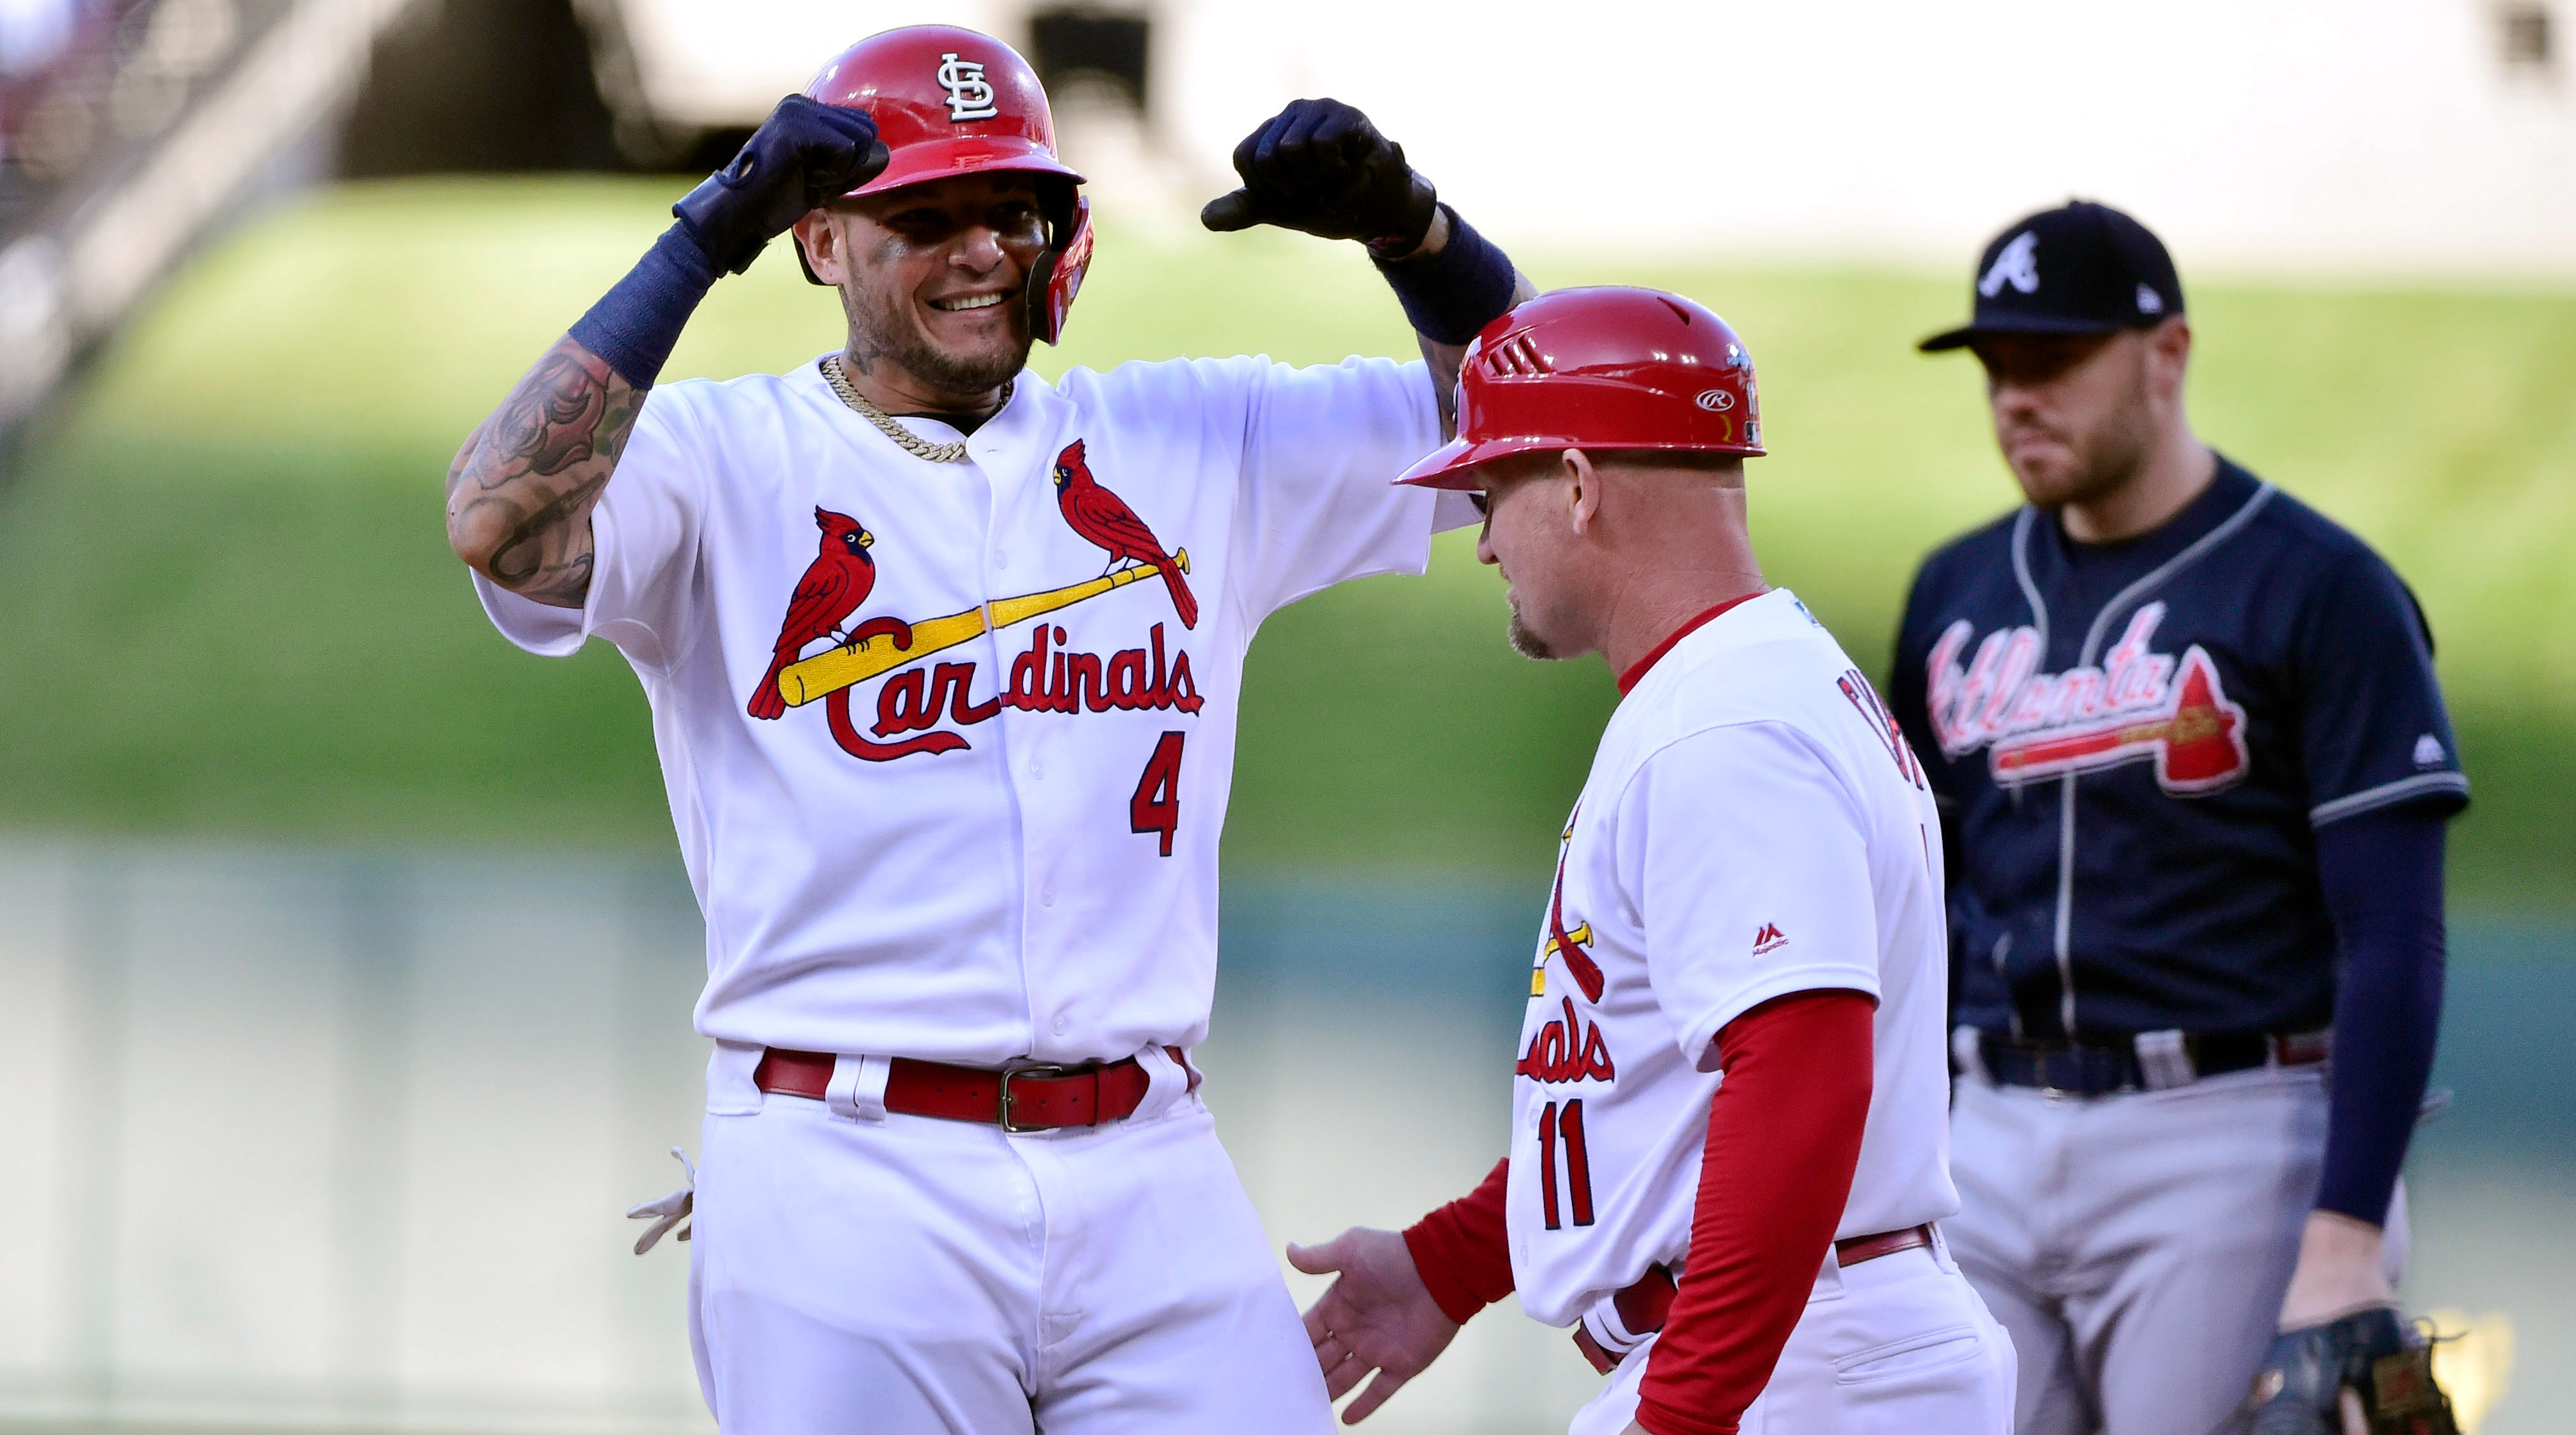 Oct 7, 2019; St. Louis, MO, USA; St. Louis Cardinals catcher Yadier Molina (4) celebrates with first base coach Stubby Clapp (11) after hitting an RBI single in the eighth inning against the Atlanta Braves in game four of the 2019 NLDS playoff baseball series at Busch Stadium. Mandatory Credit: Jeff Curry-USA TODAY Sports